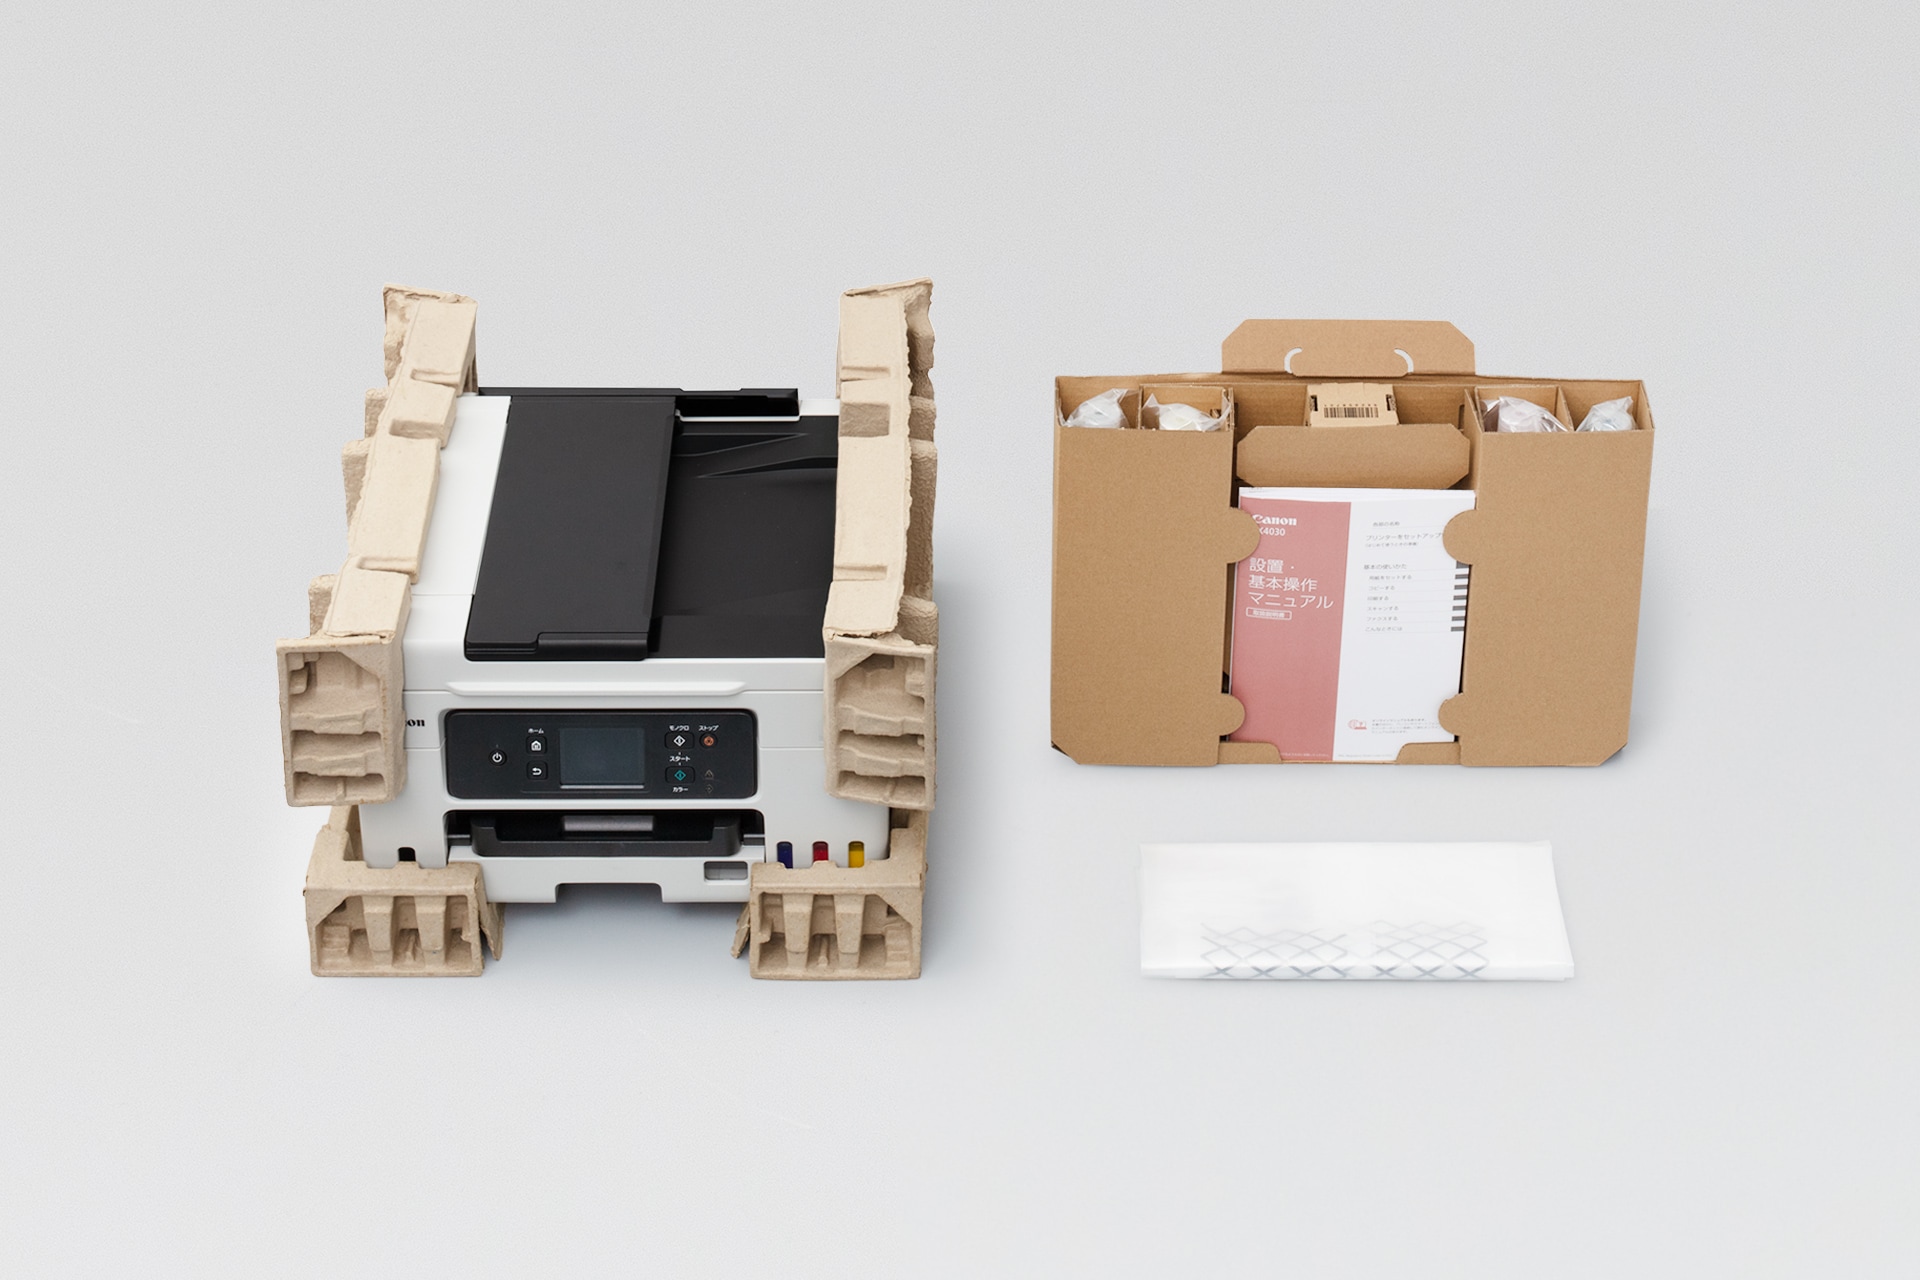 Example of packaging materials for the 'GX4030' Inkjet printer